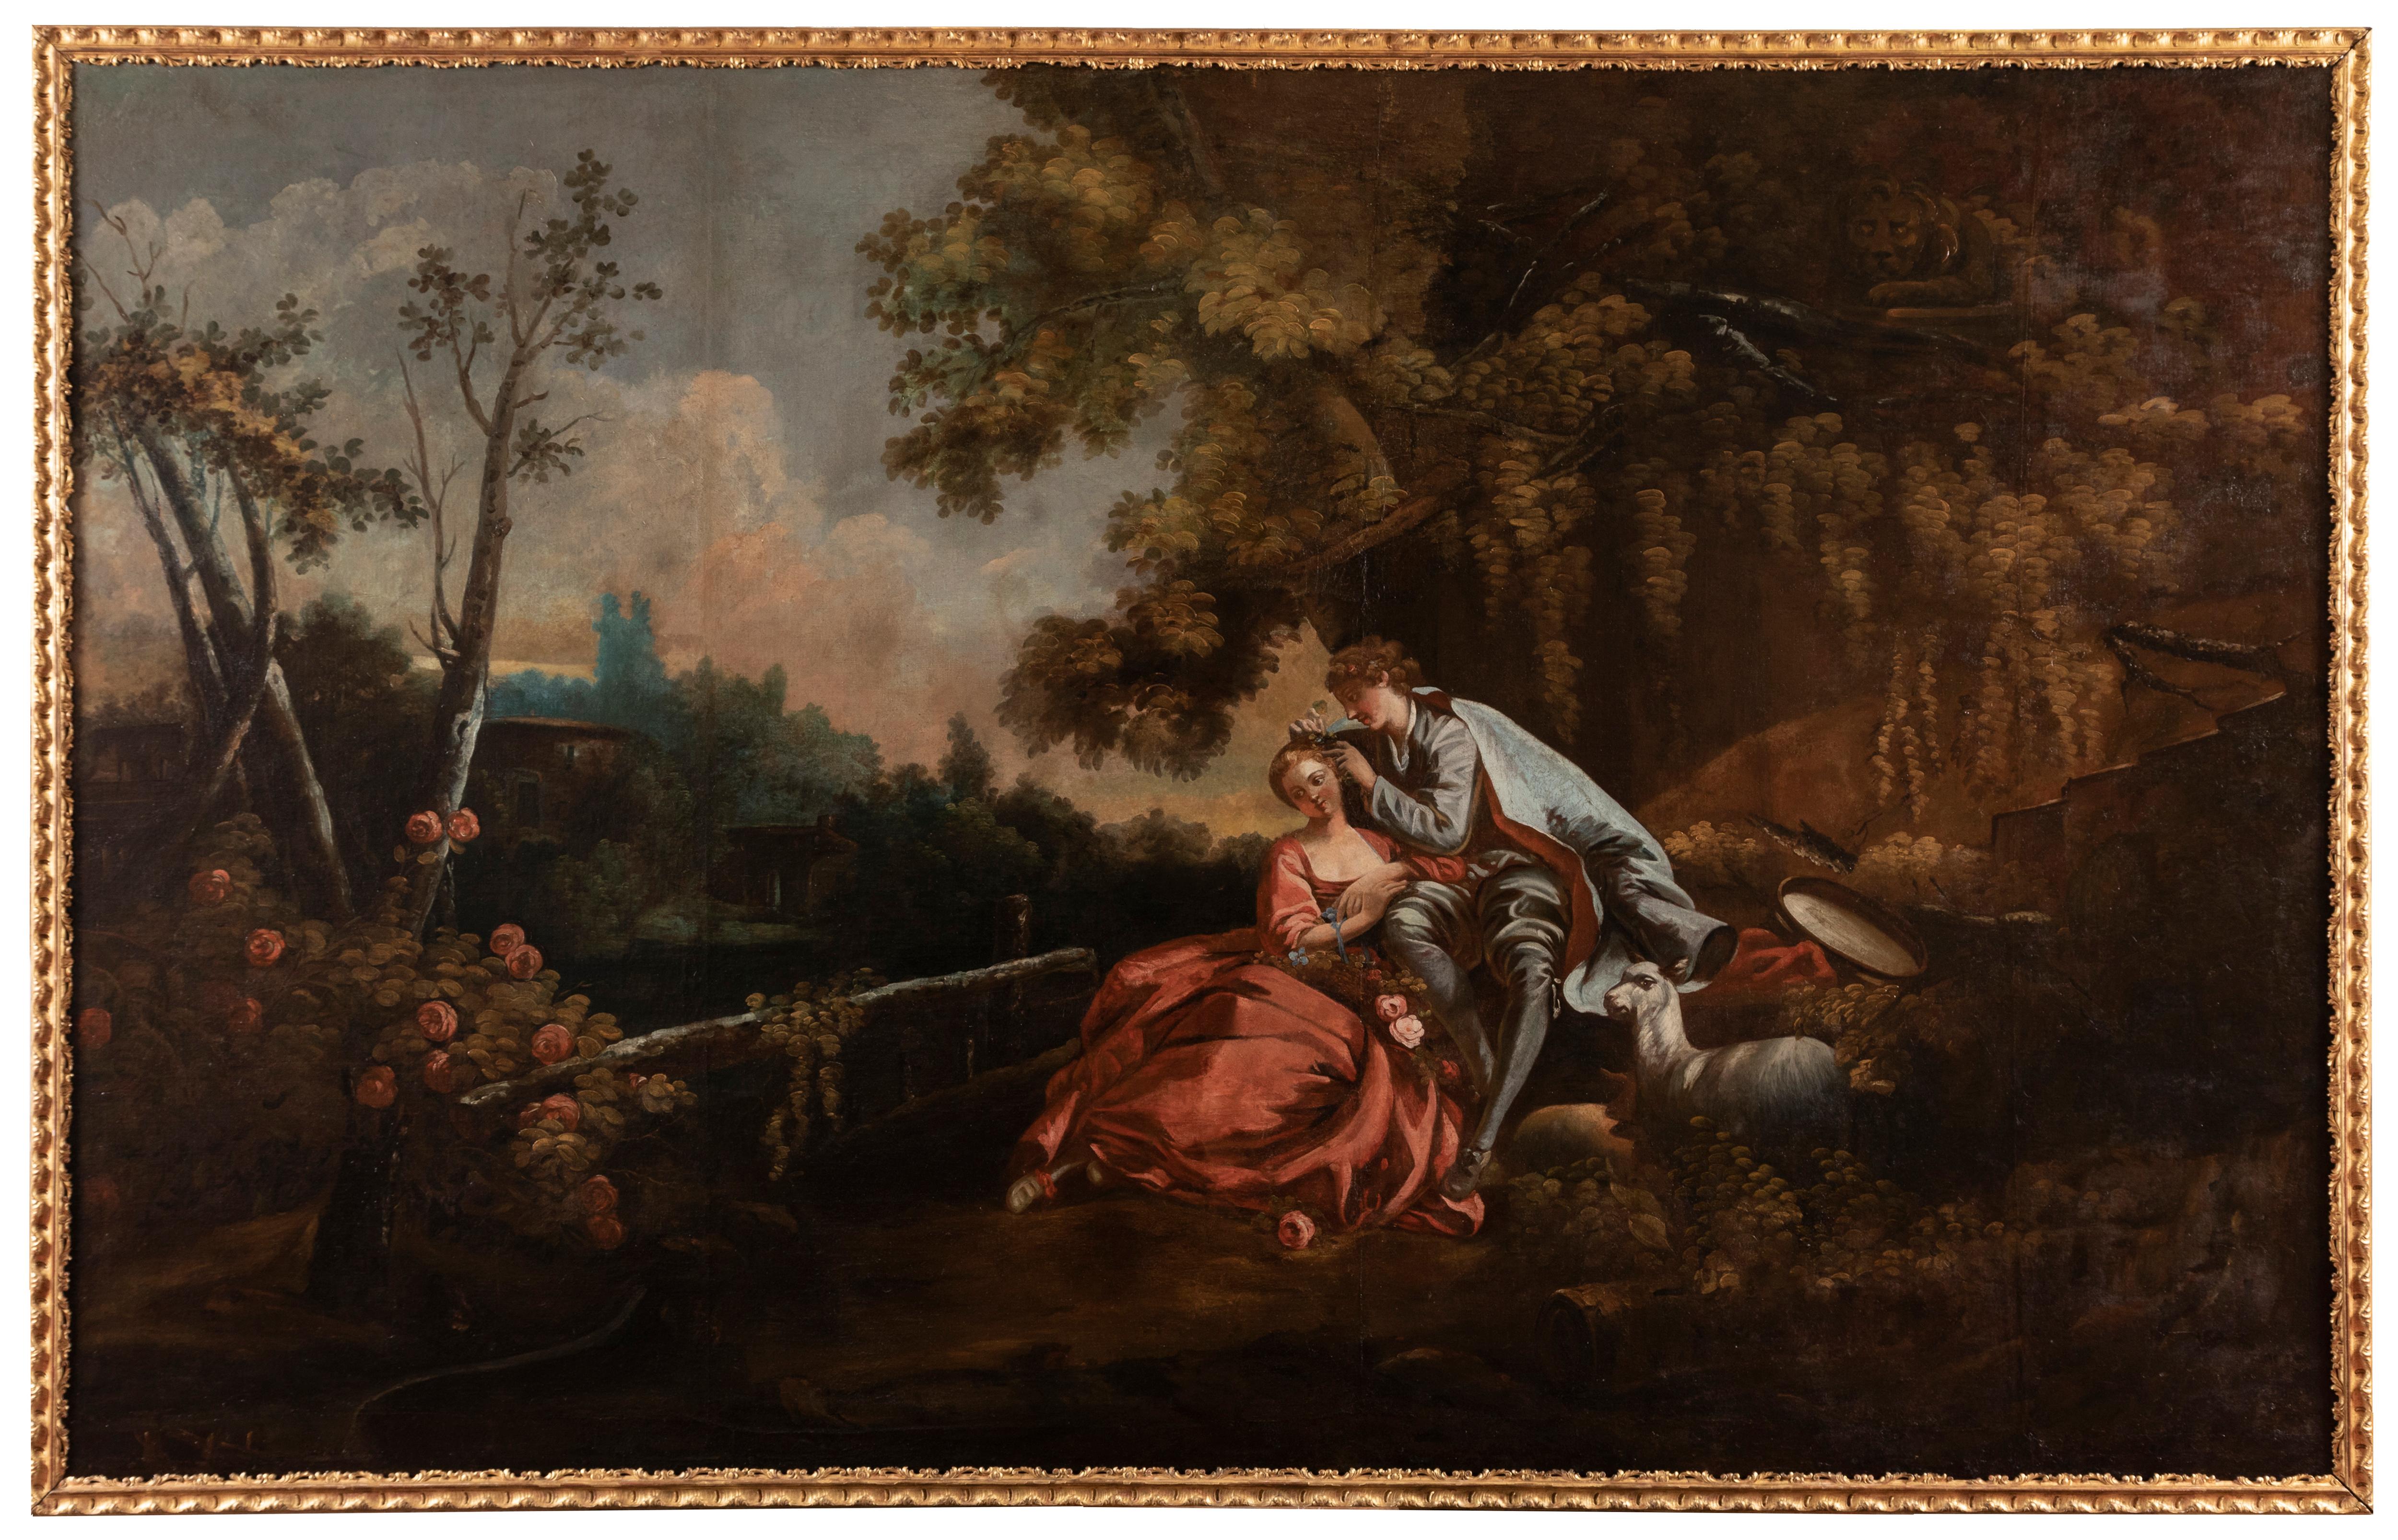 Very rare triptych of the 18th century, follower of François Boucher. Our impressively-sized paintings come from a private collection of a famous French family (Marnier Lapostolle).
Its display in a monumental entrance reflects the good taste of